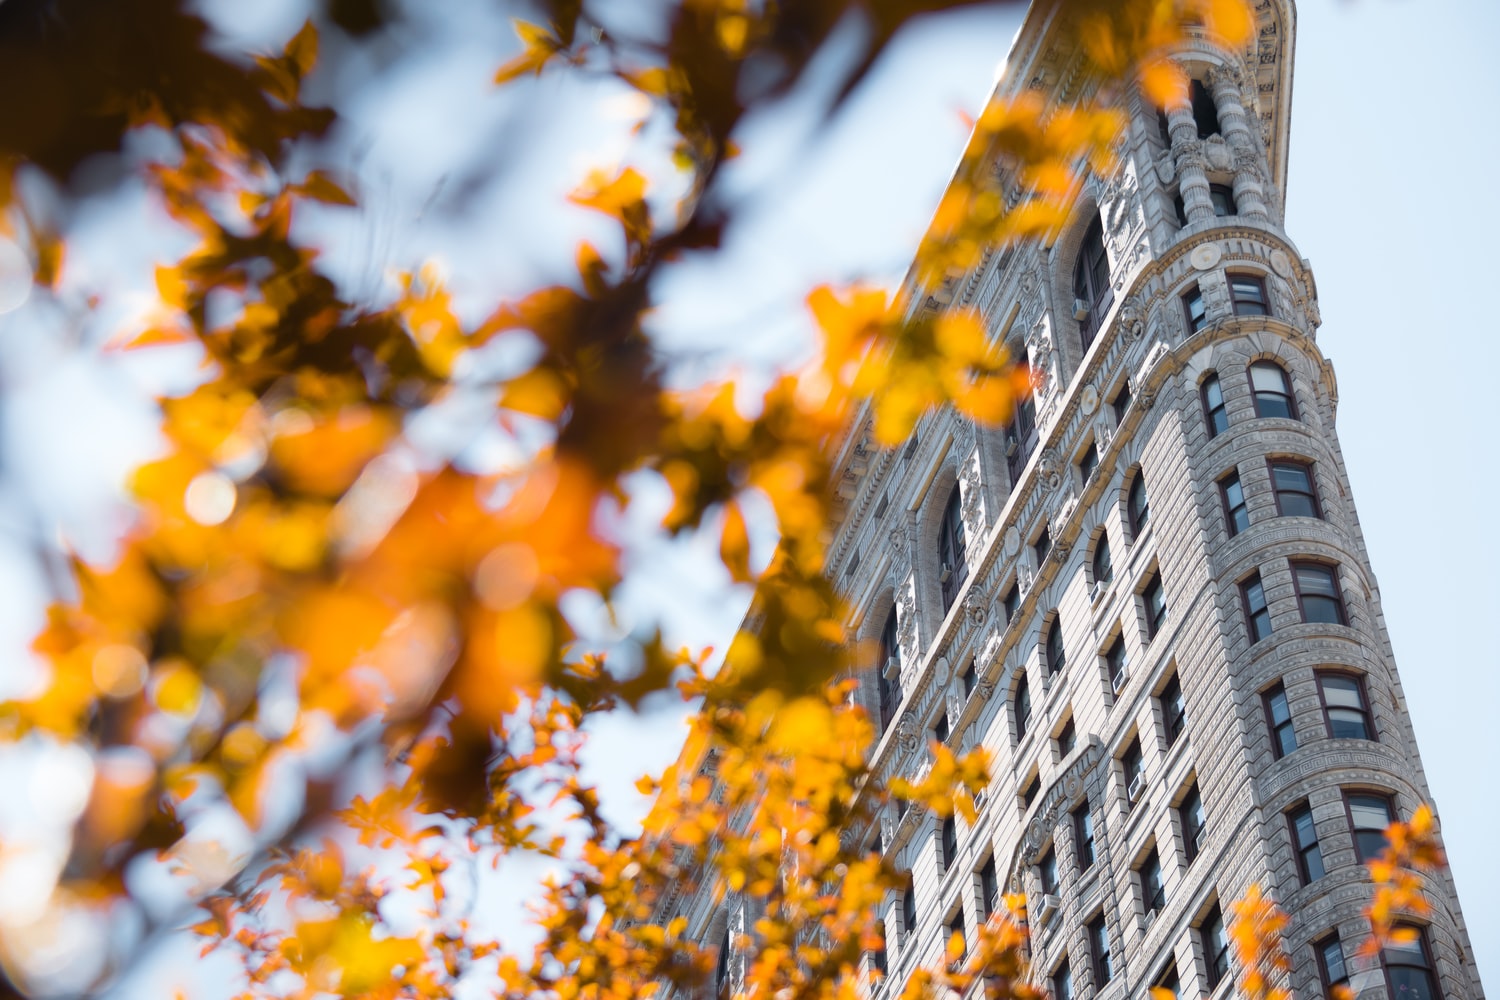 Flatiron building in NYC with fall leaves in front view